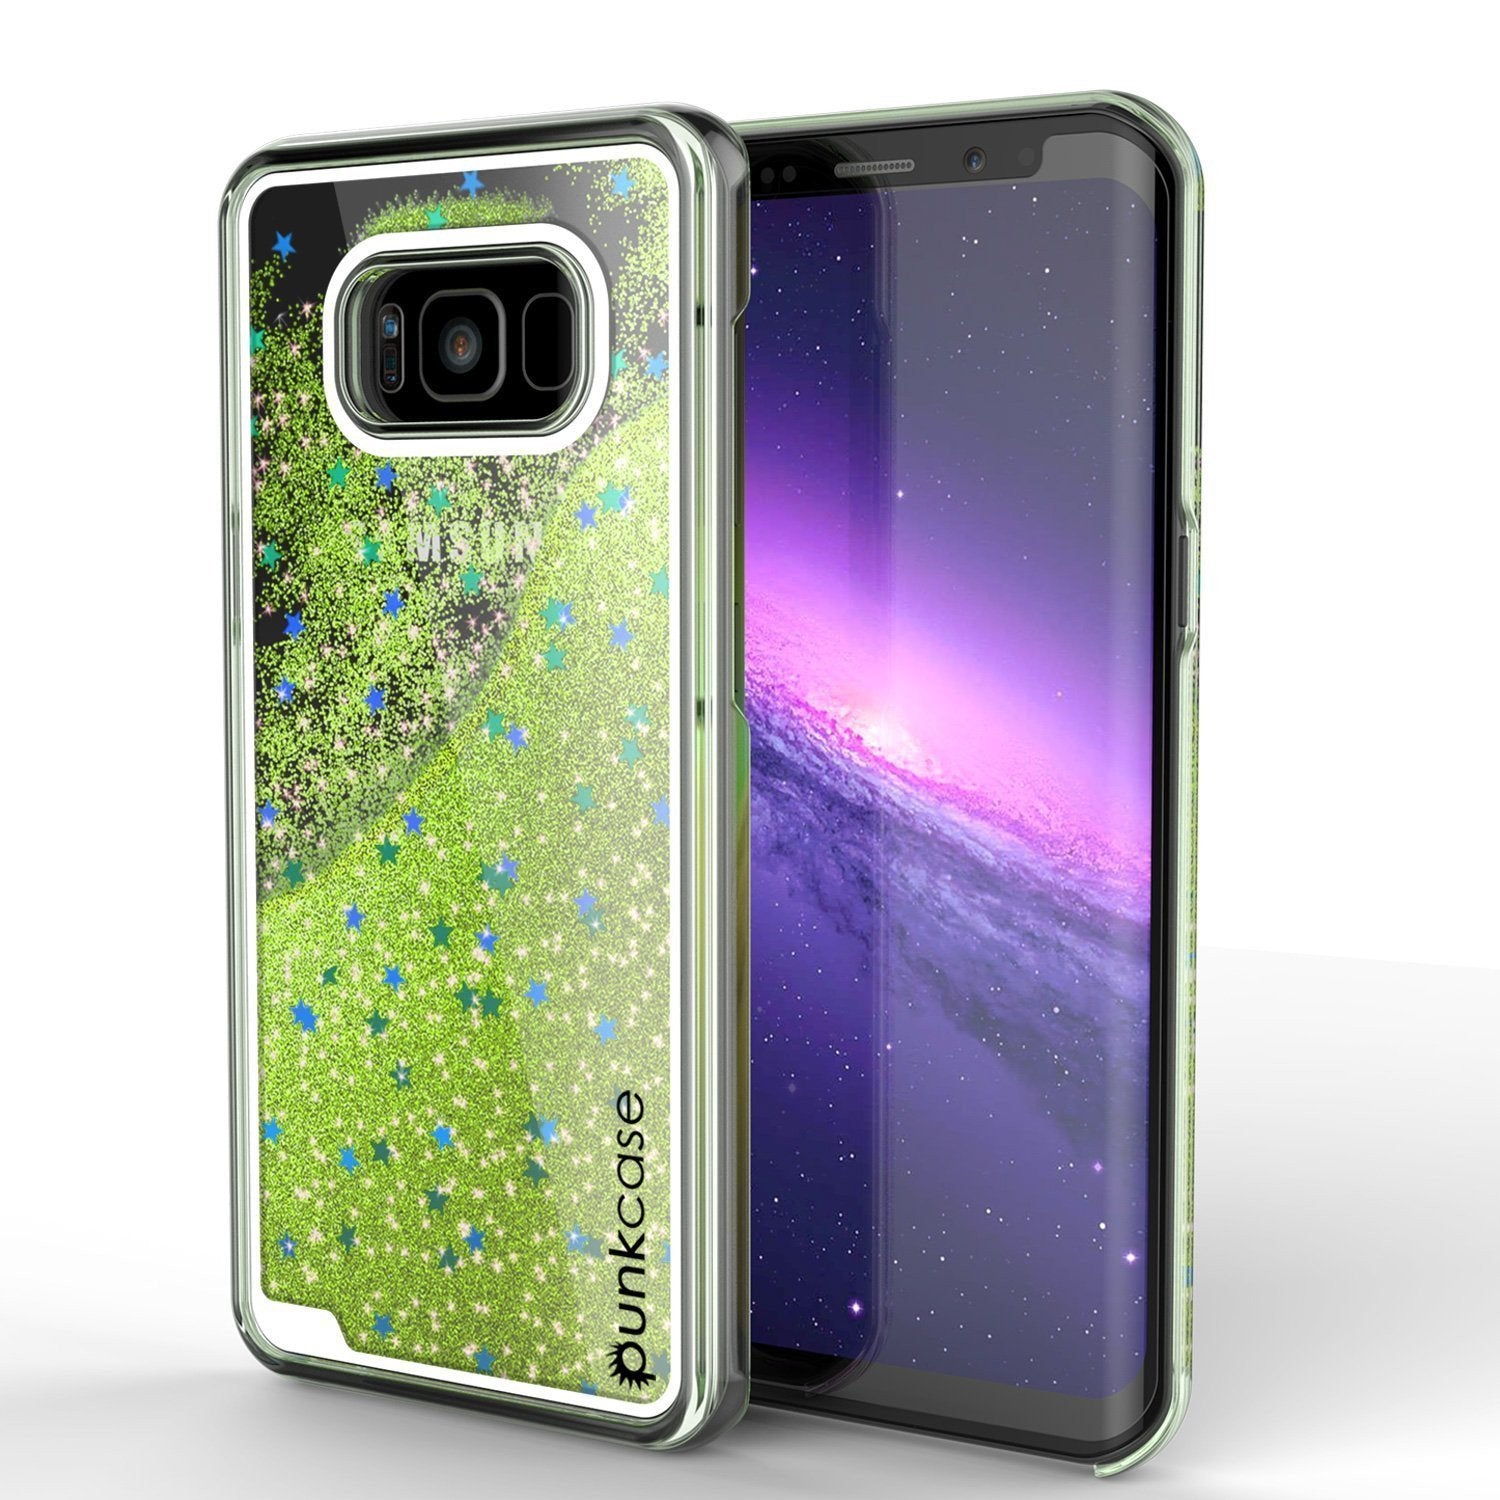 S8 Plus Case, Punkcase [Liquid Series] Protective Dual Layer Floating Glitter Cover with lots of Bling & Sparkle + PunkShield Screen Protector for Samsungs Galaxy S8+ (Light Green]